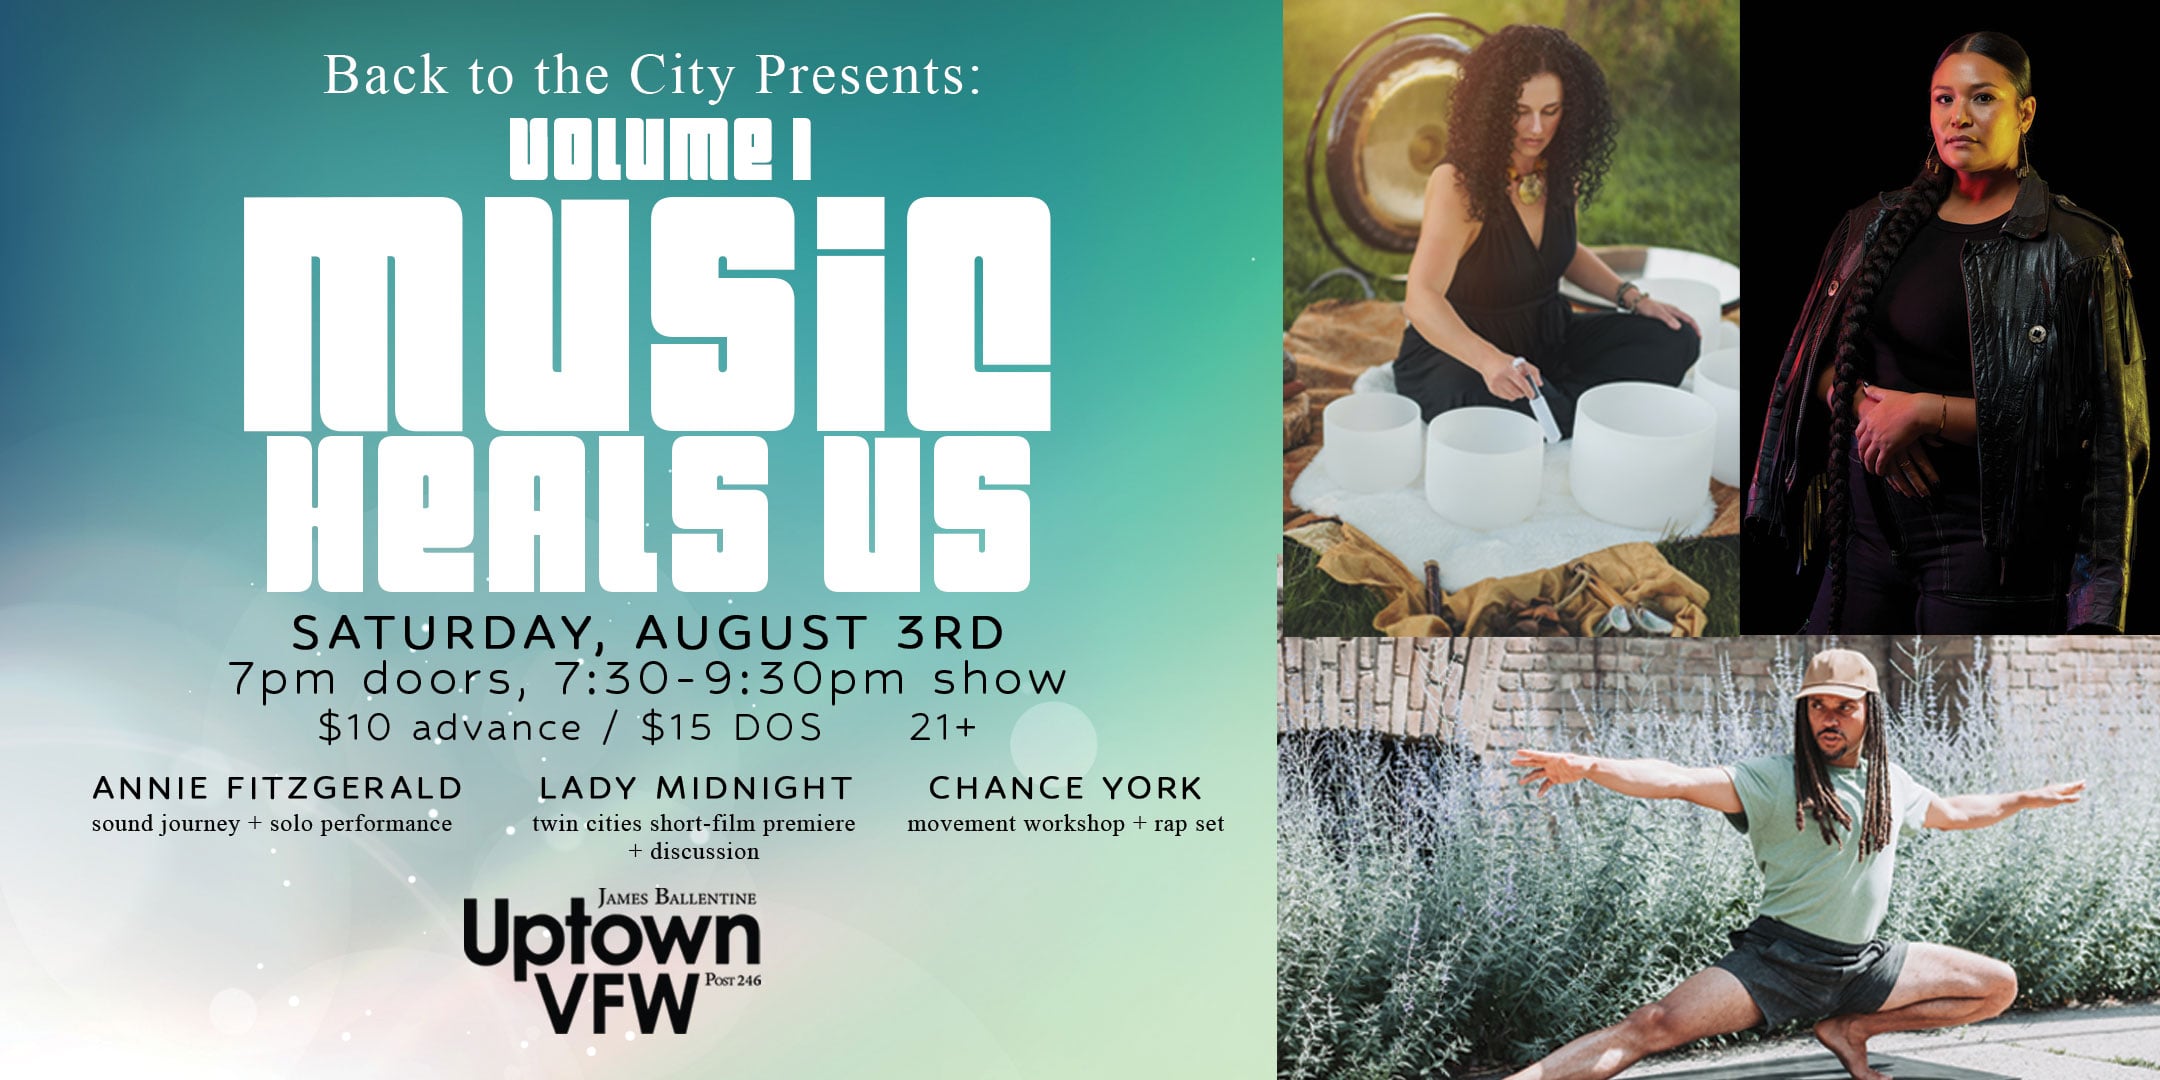 BACK TO THE CITY PRESENTS MUSIC HEALS US VOLUME 1: ANNIE FITZGERALD | LADY MIDNIGHT | CHANCE YORK Saturday August 3rd James Ballentine "Uptown" VFW Post 246 2916 Lyndale Ave S Mpls Doors 7pm :: Show 7:30-9:30pm :: 21+ GA: $10 ADV / $15 DOS